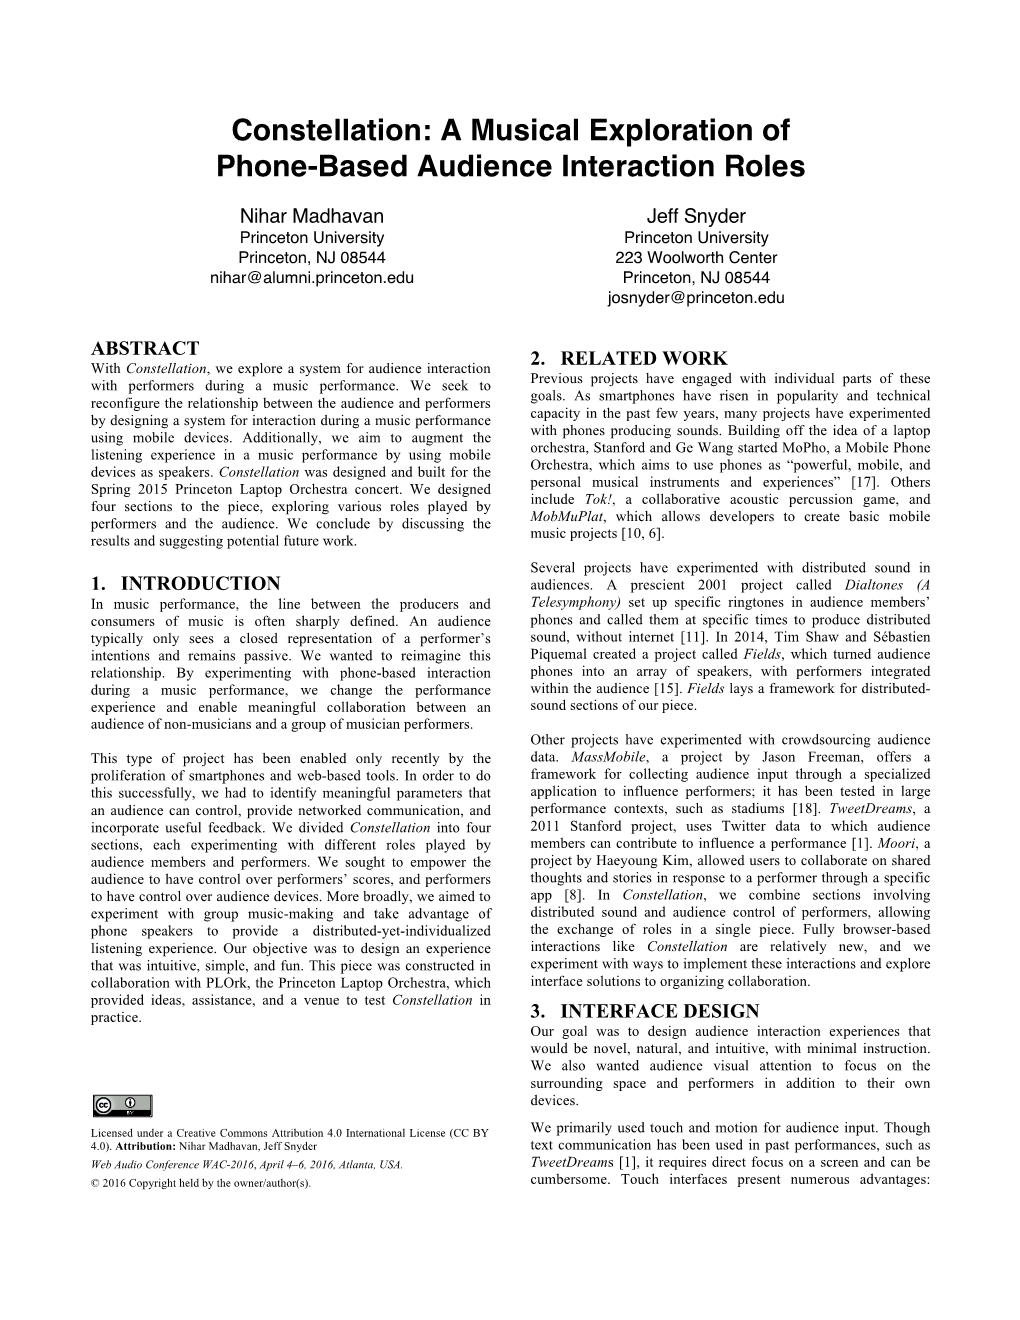 A Musical Exploration of Phone-Based Audience Interaction Roles